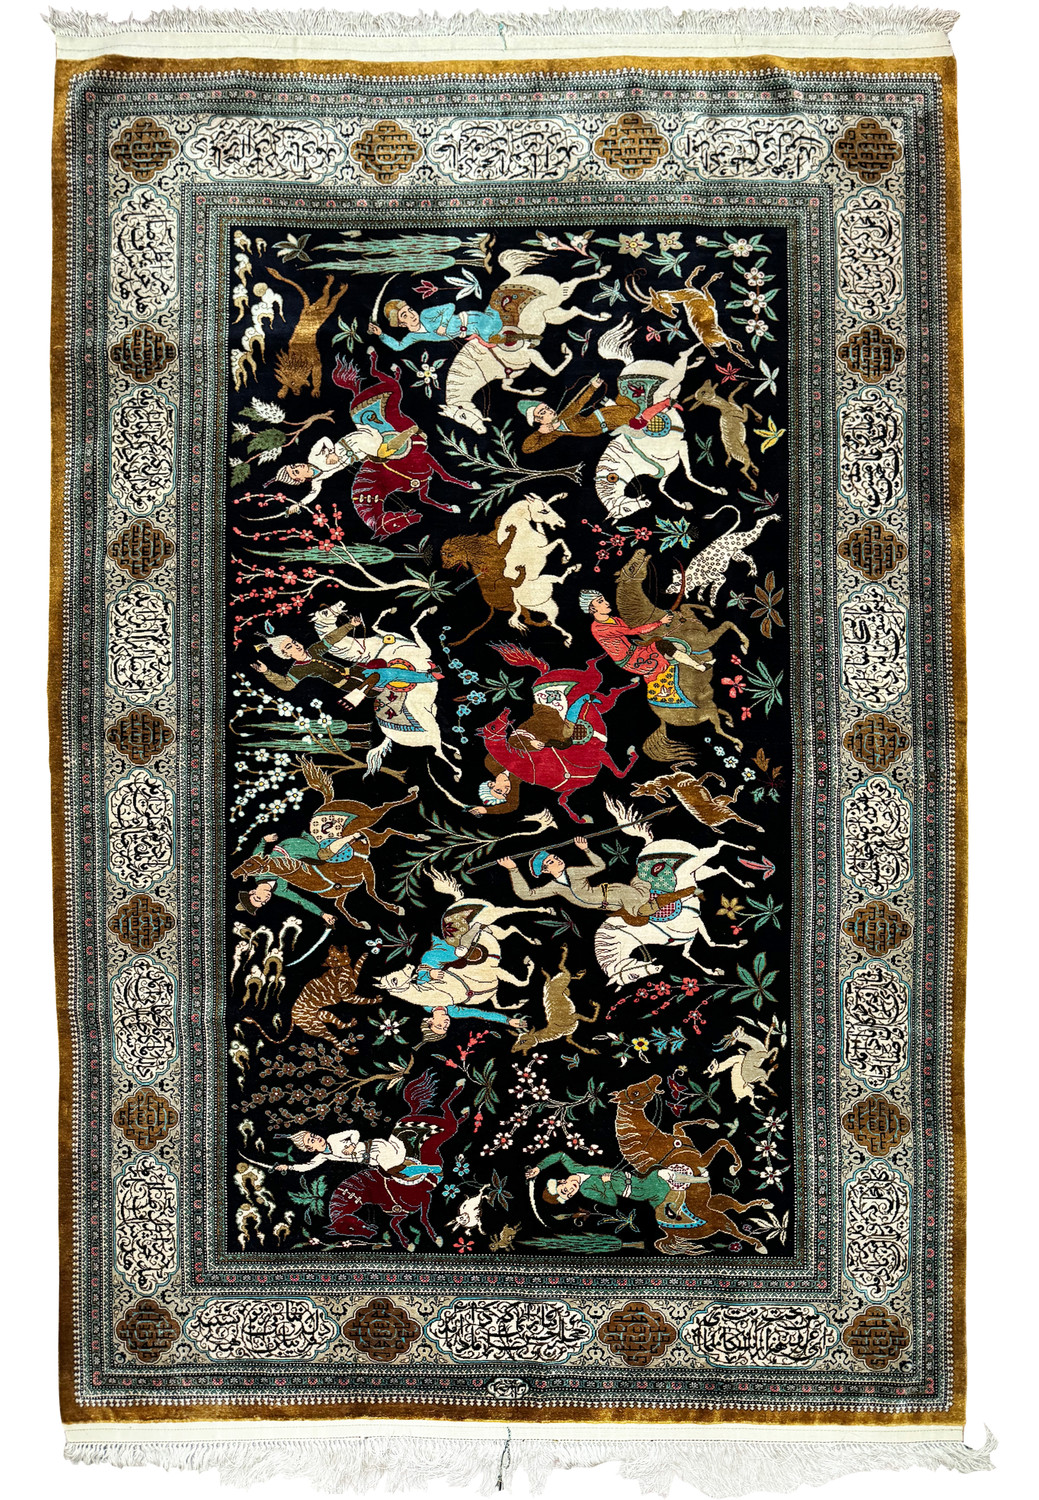 4'6" x 7' Persian Qum Silk Hunting Rug displaying horsemen and wildlife on a dark background with an elaborate border, hand-knotted in Iran